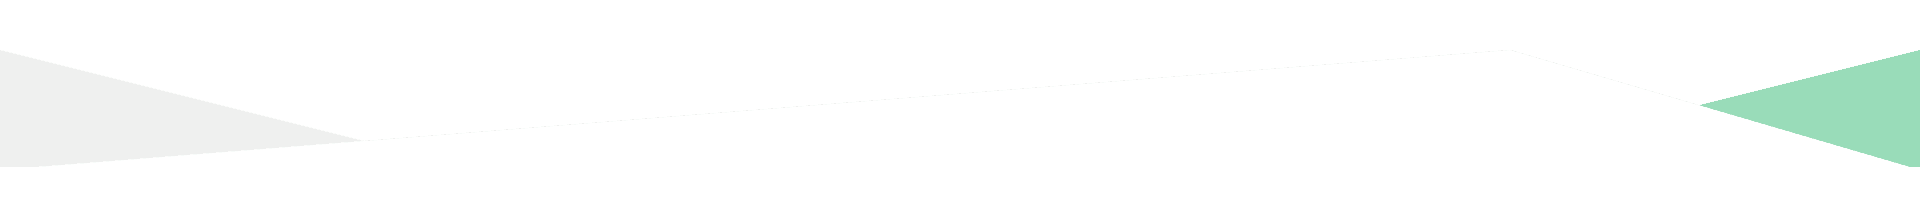 A green and white background with a line